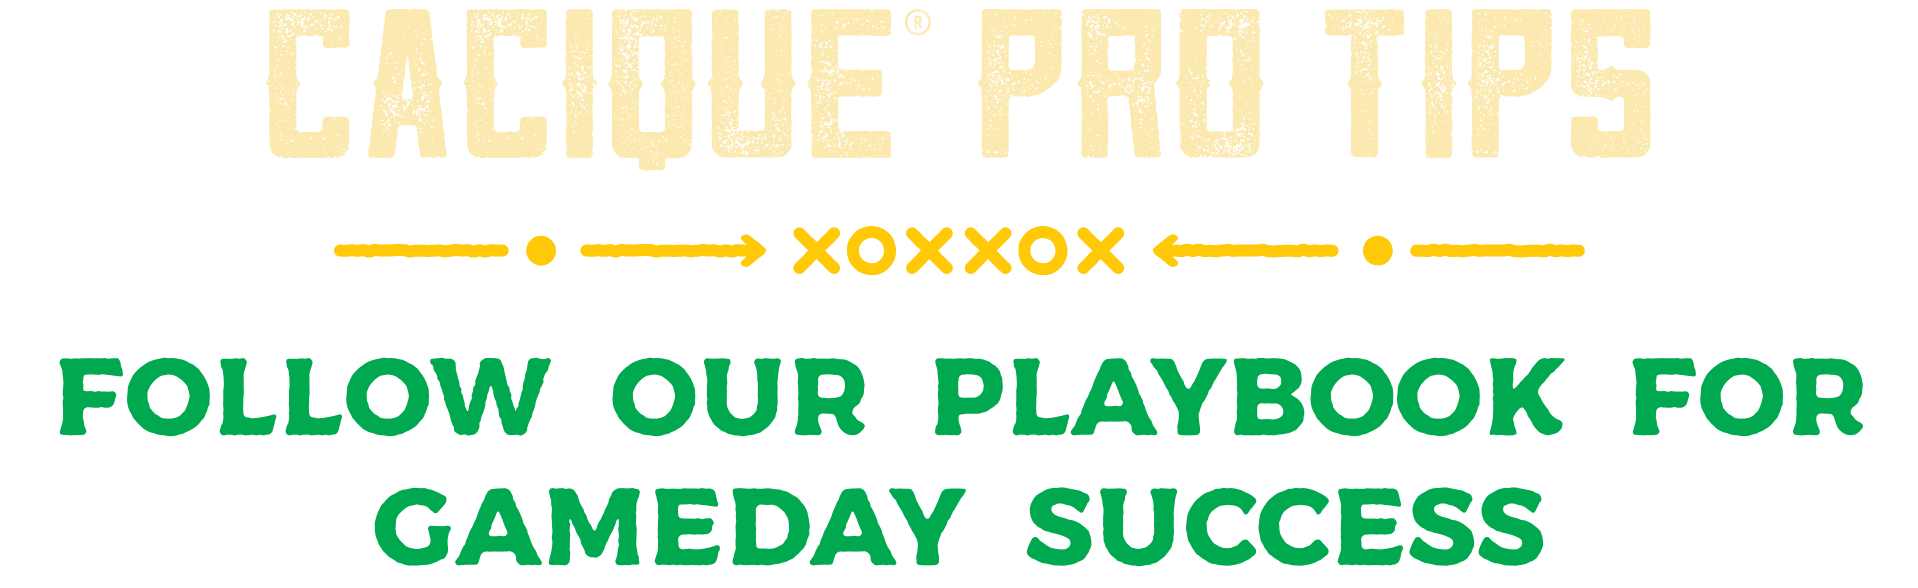 Cacique Pro Tips - Follow Our Playbook for Gameday Success